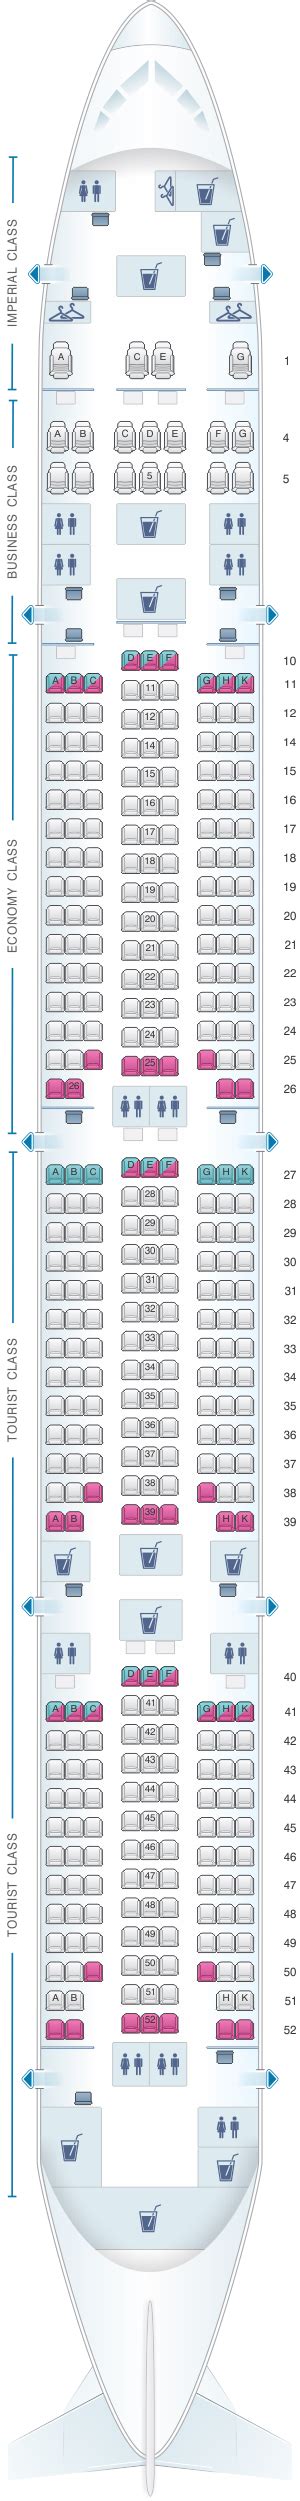 Seat Map Turkish Airlines Boeing B F Seatmaestro Images And Photos Finder